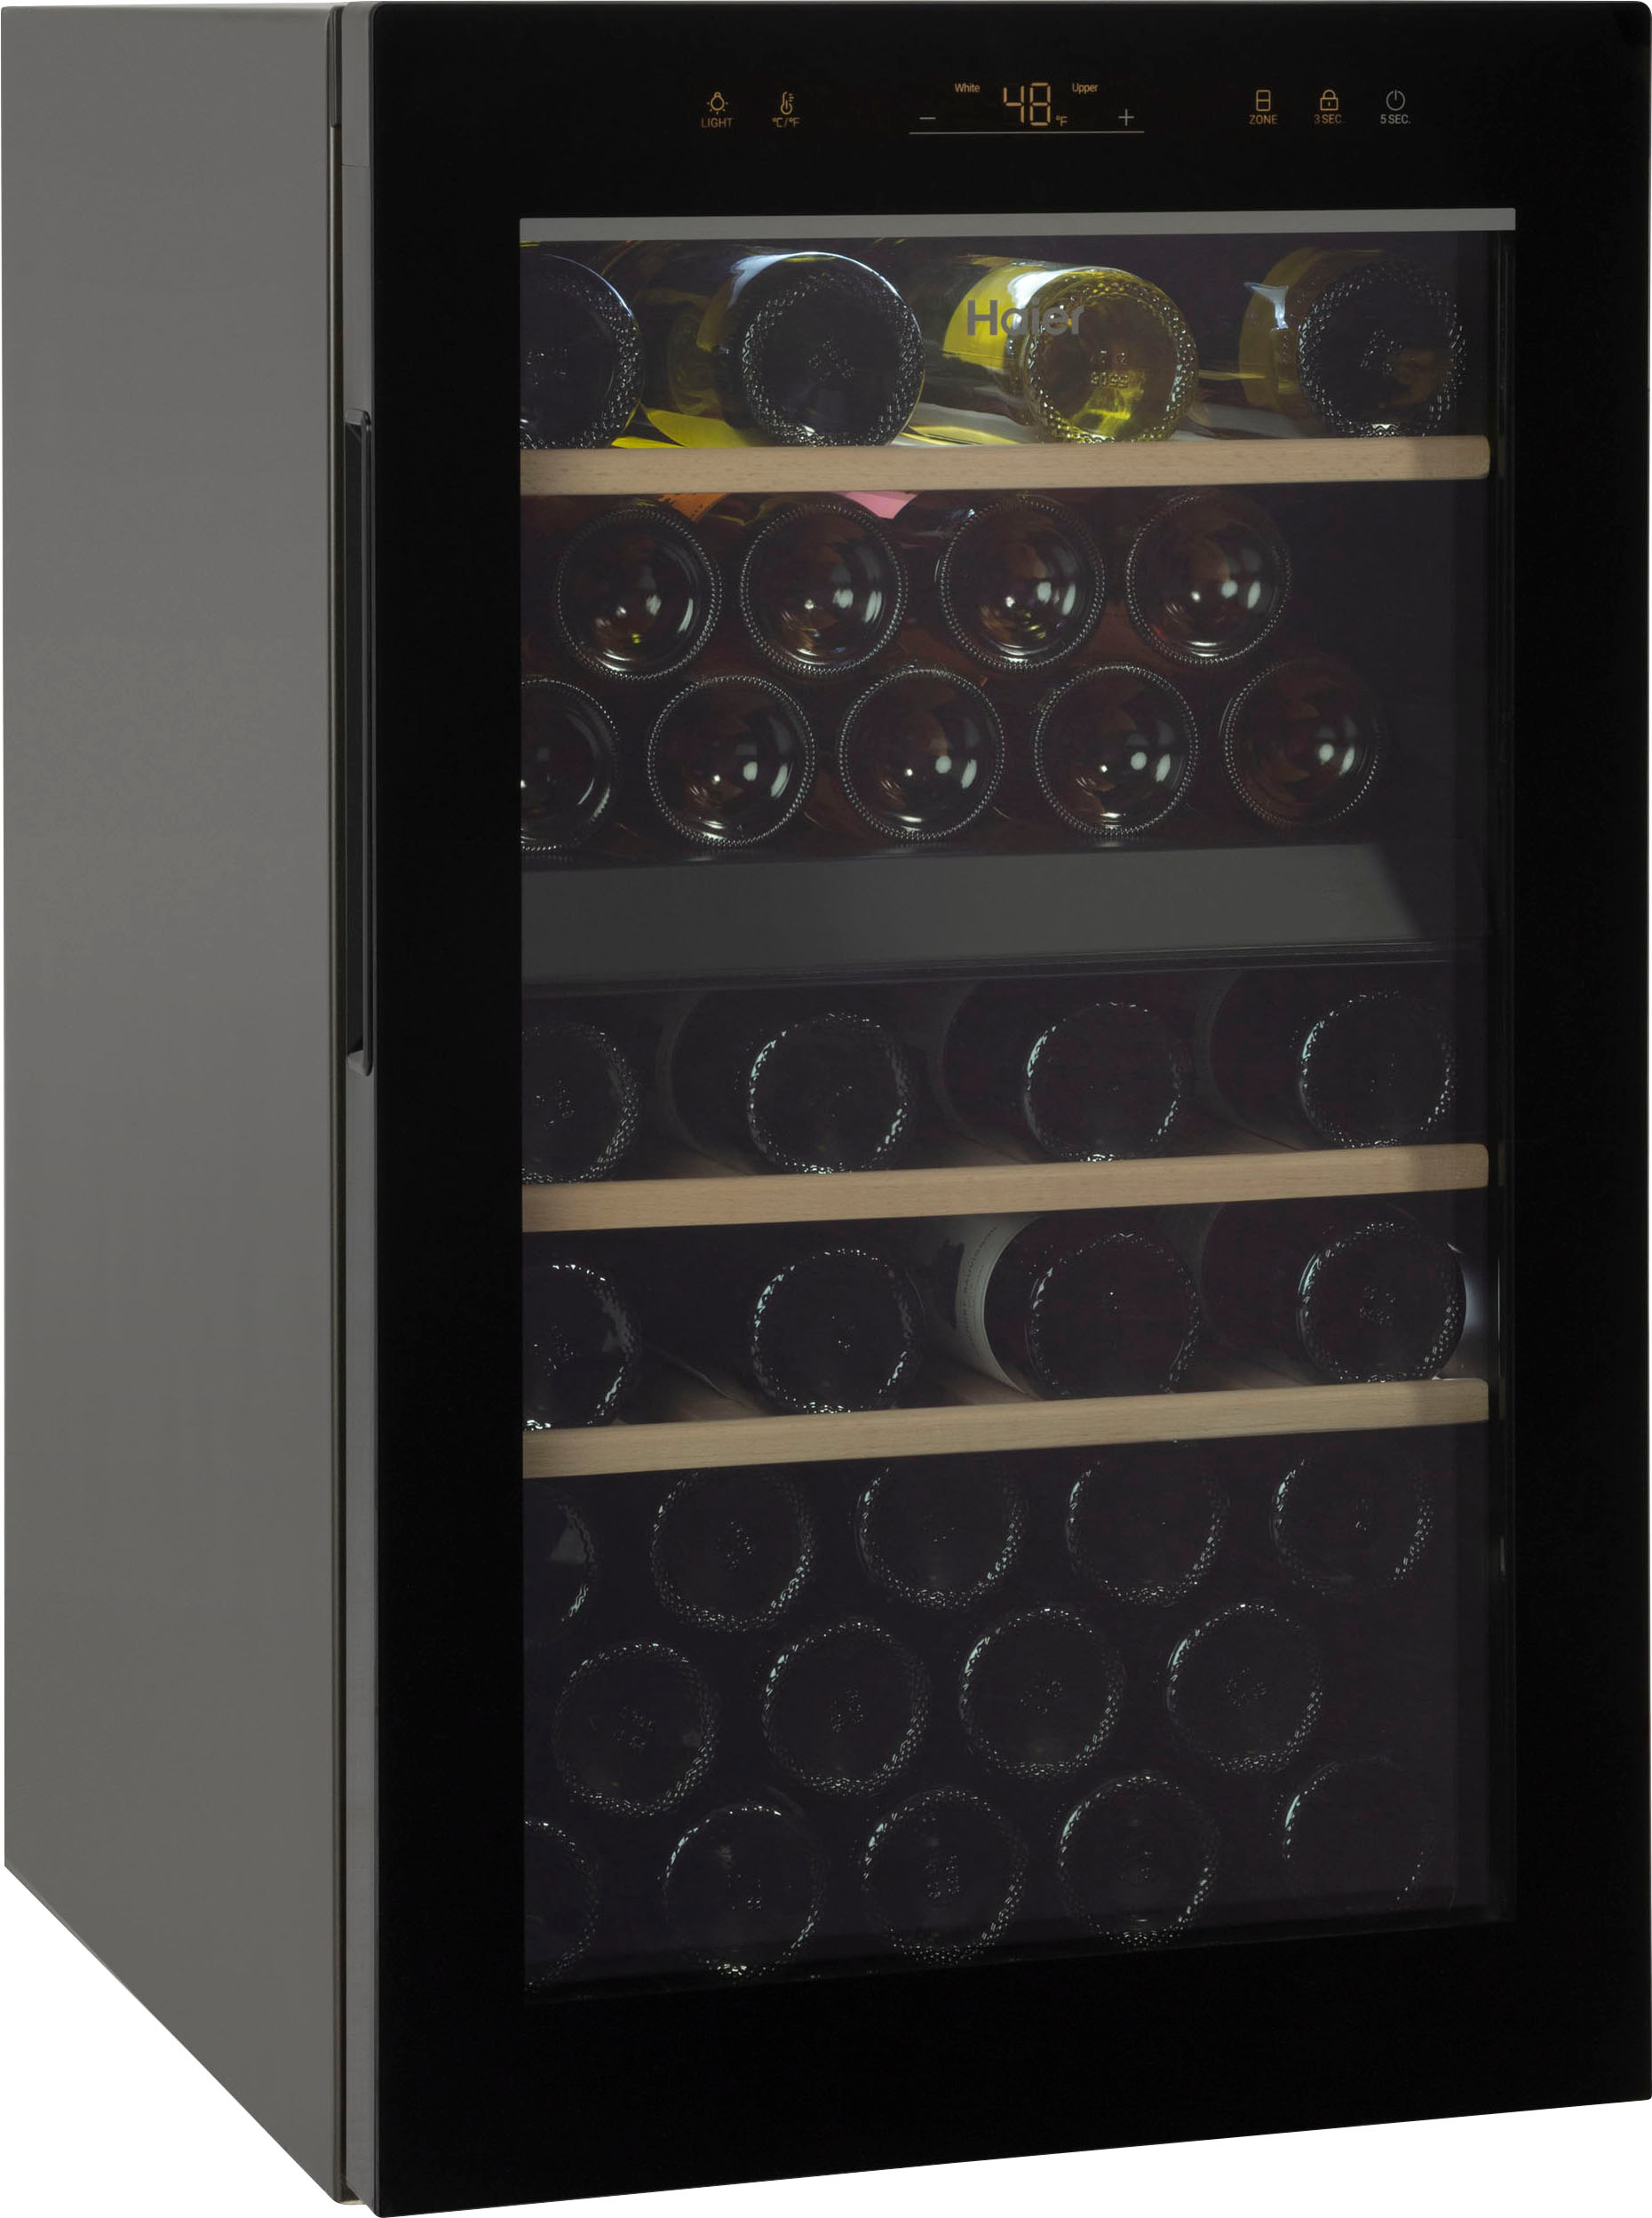 Angle View: Haier - 44-Bottle Wine Cooler - Black glass